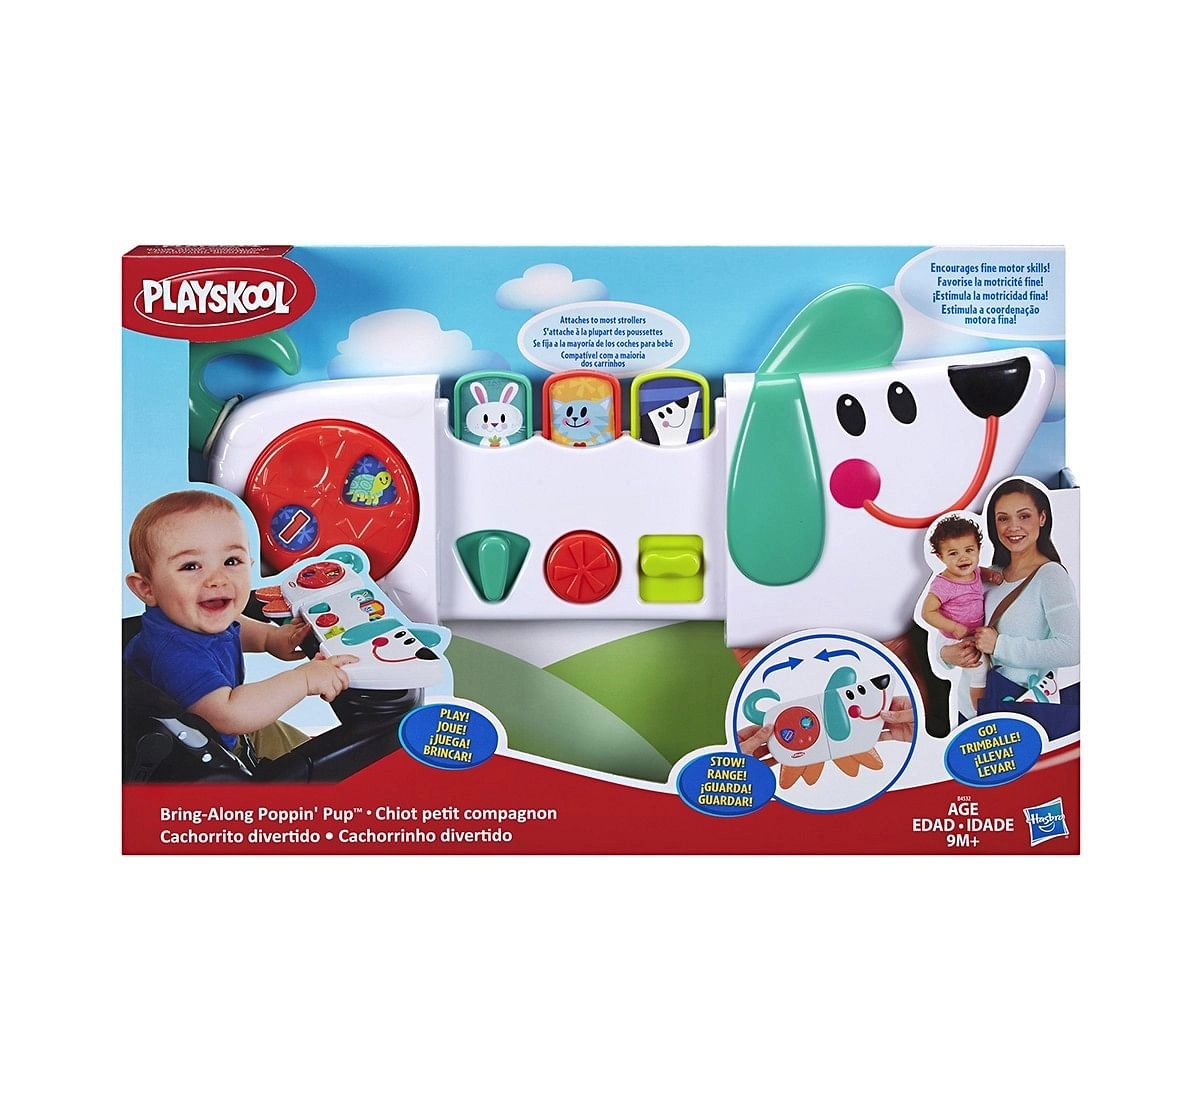 Playskool Bring-Along Poppin' Pup Activity Toys for Kids age 9M+ 